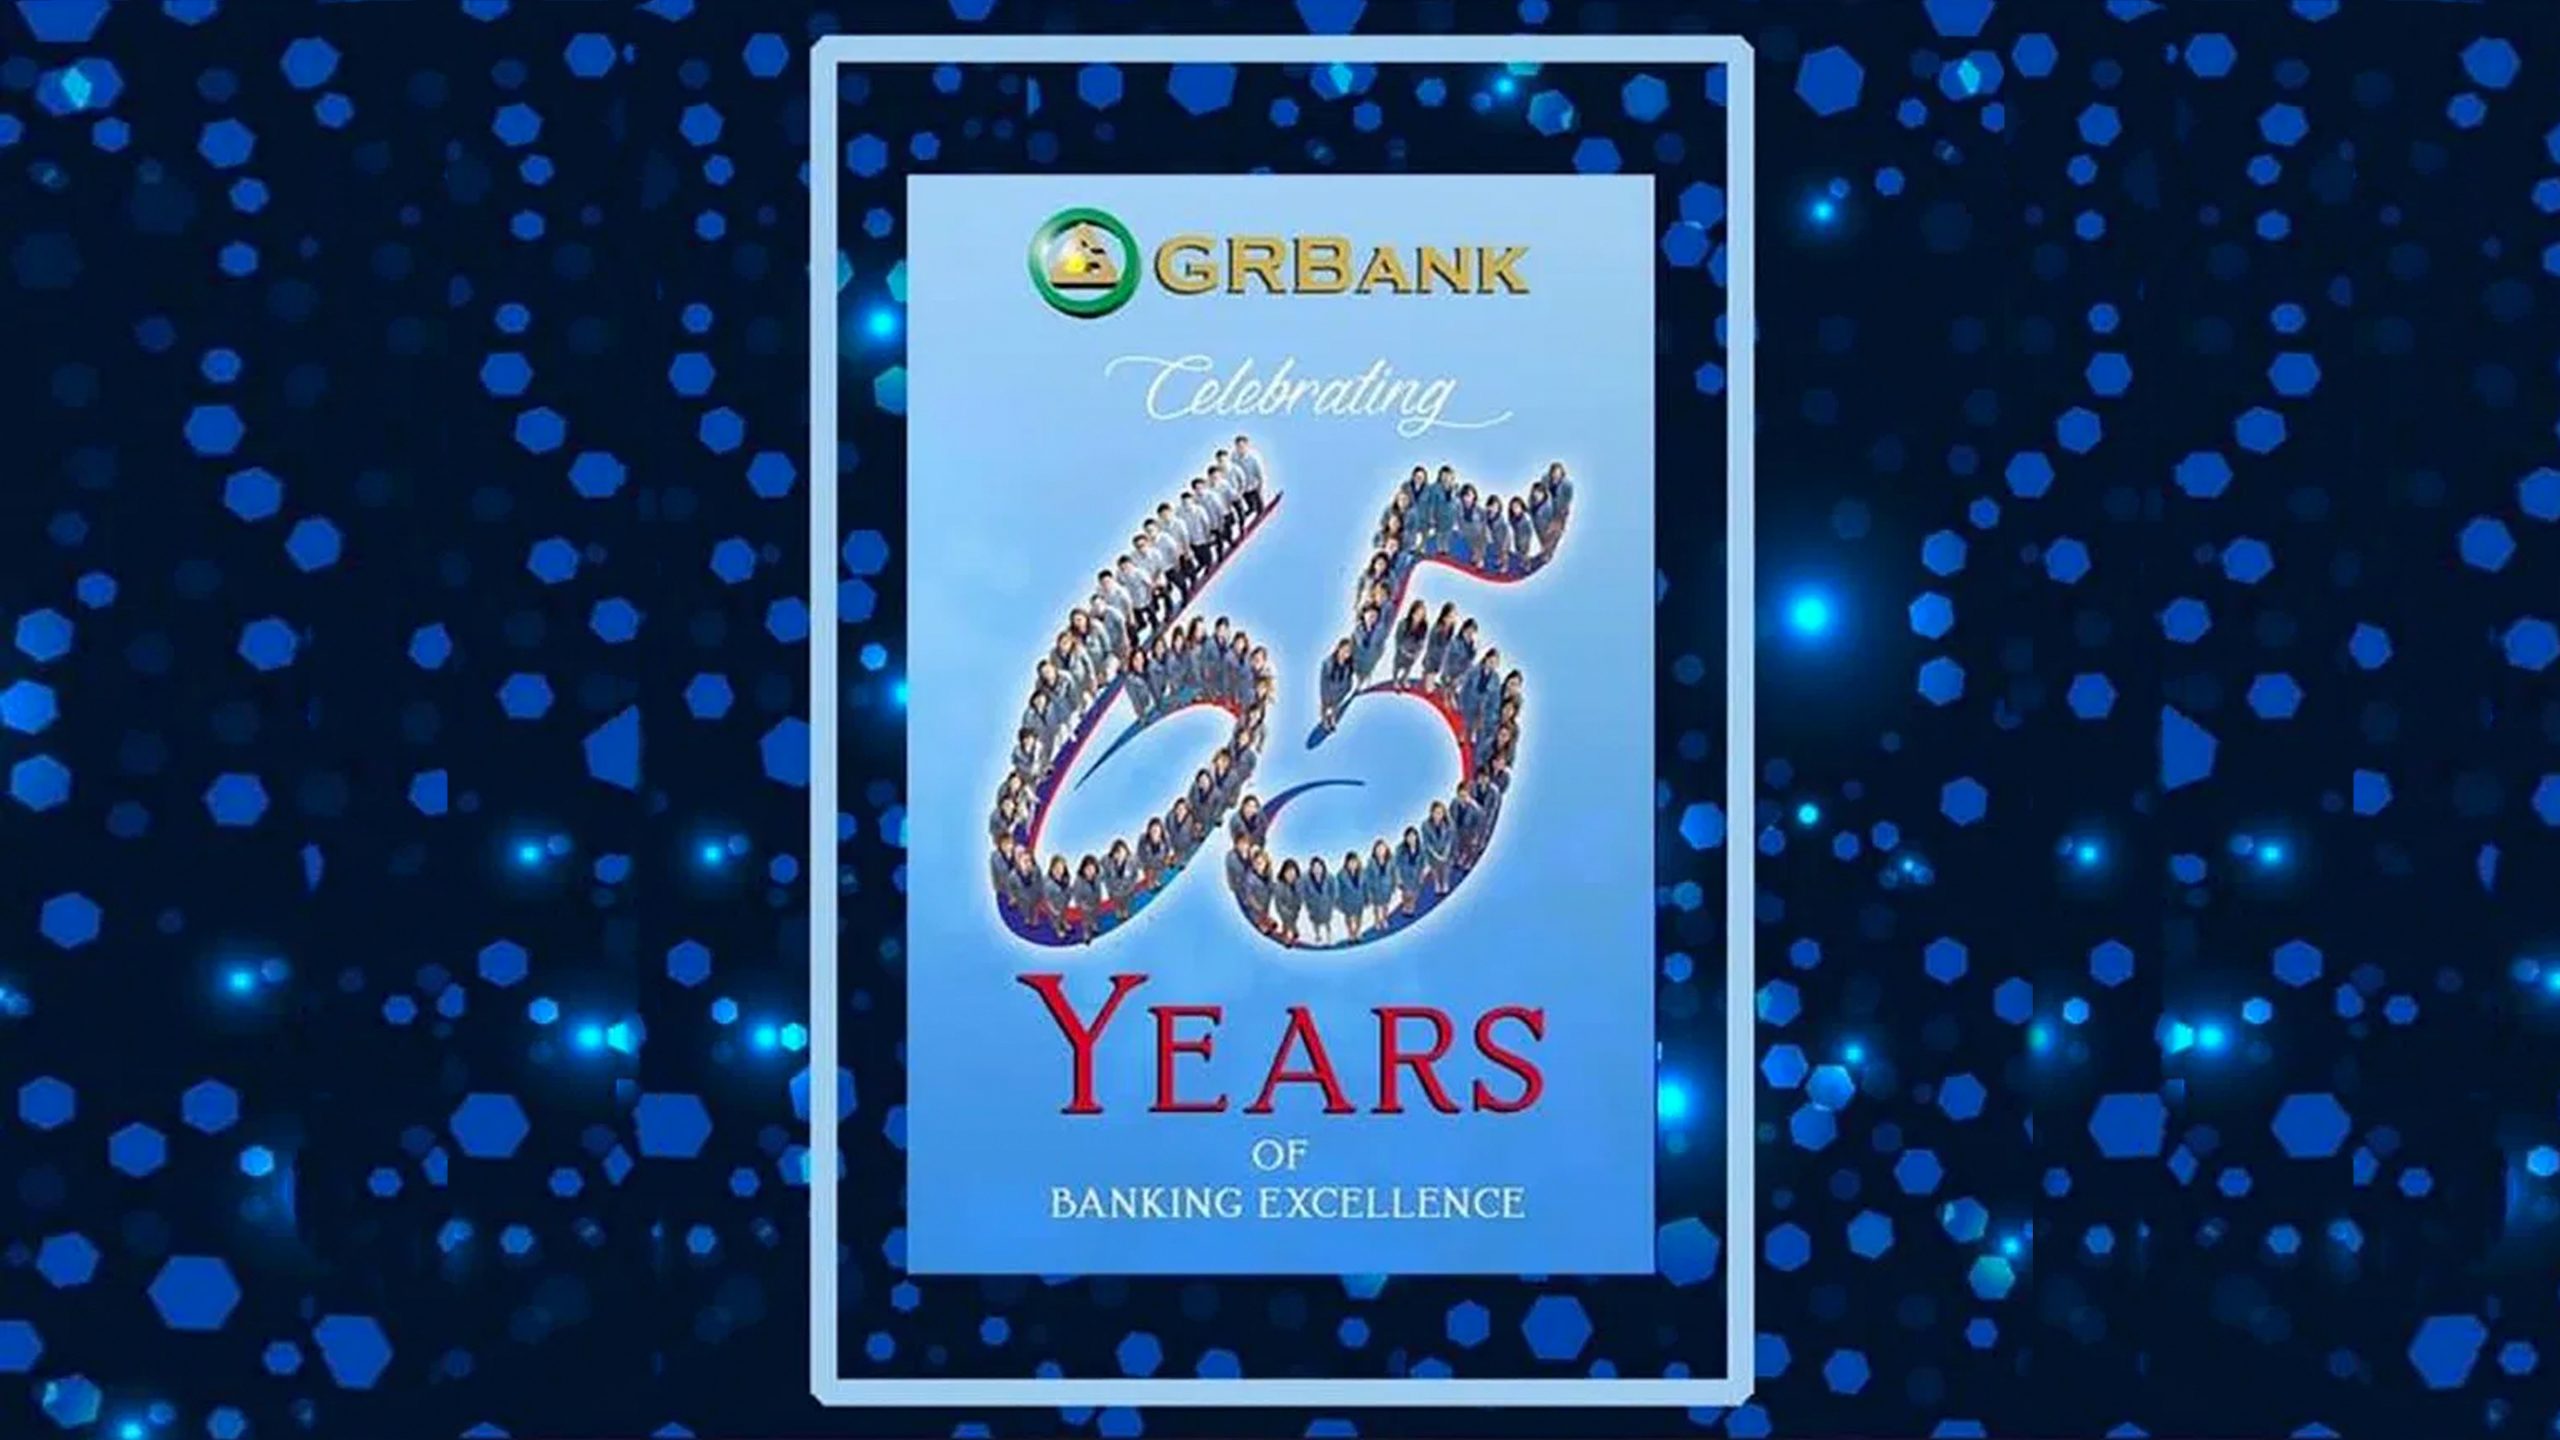 GMA Lauds GRBank’s 65 Years Of Fruitful Banking Service